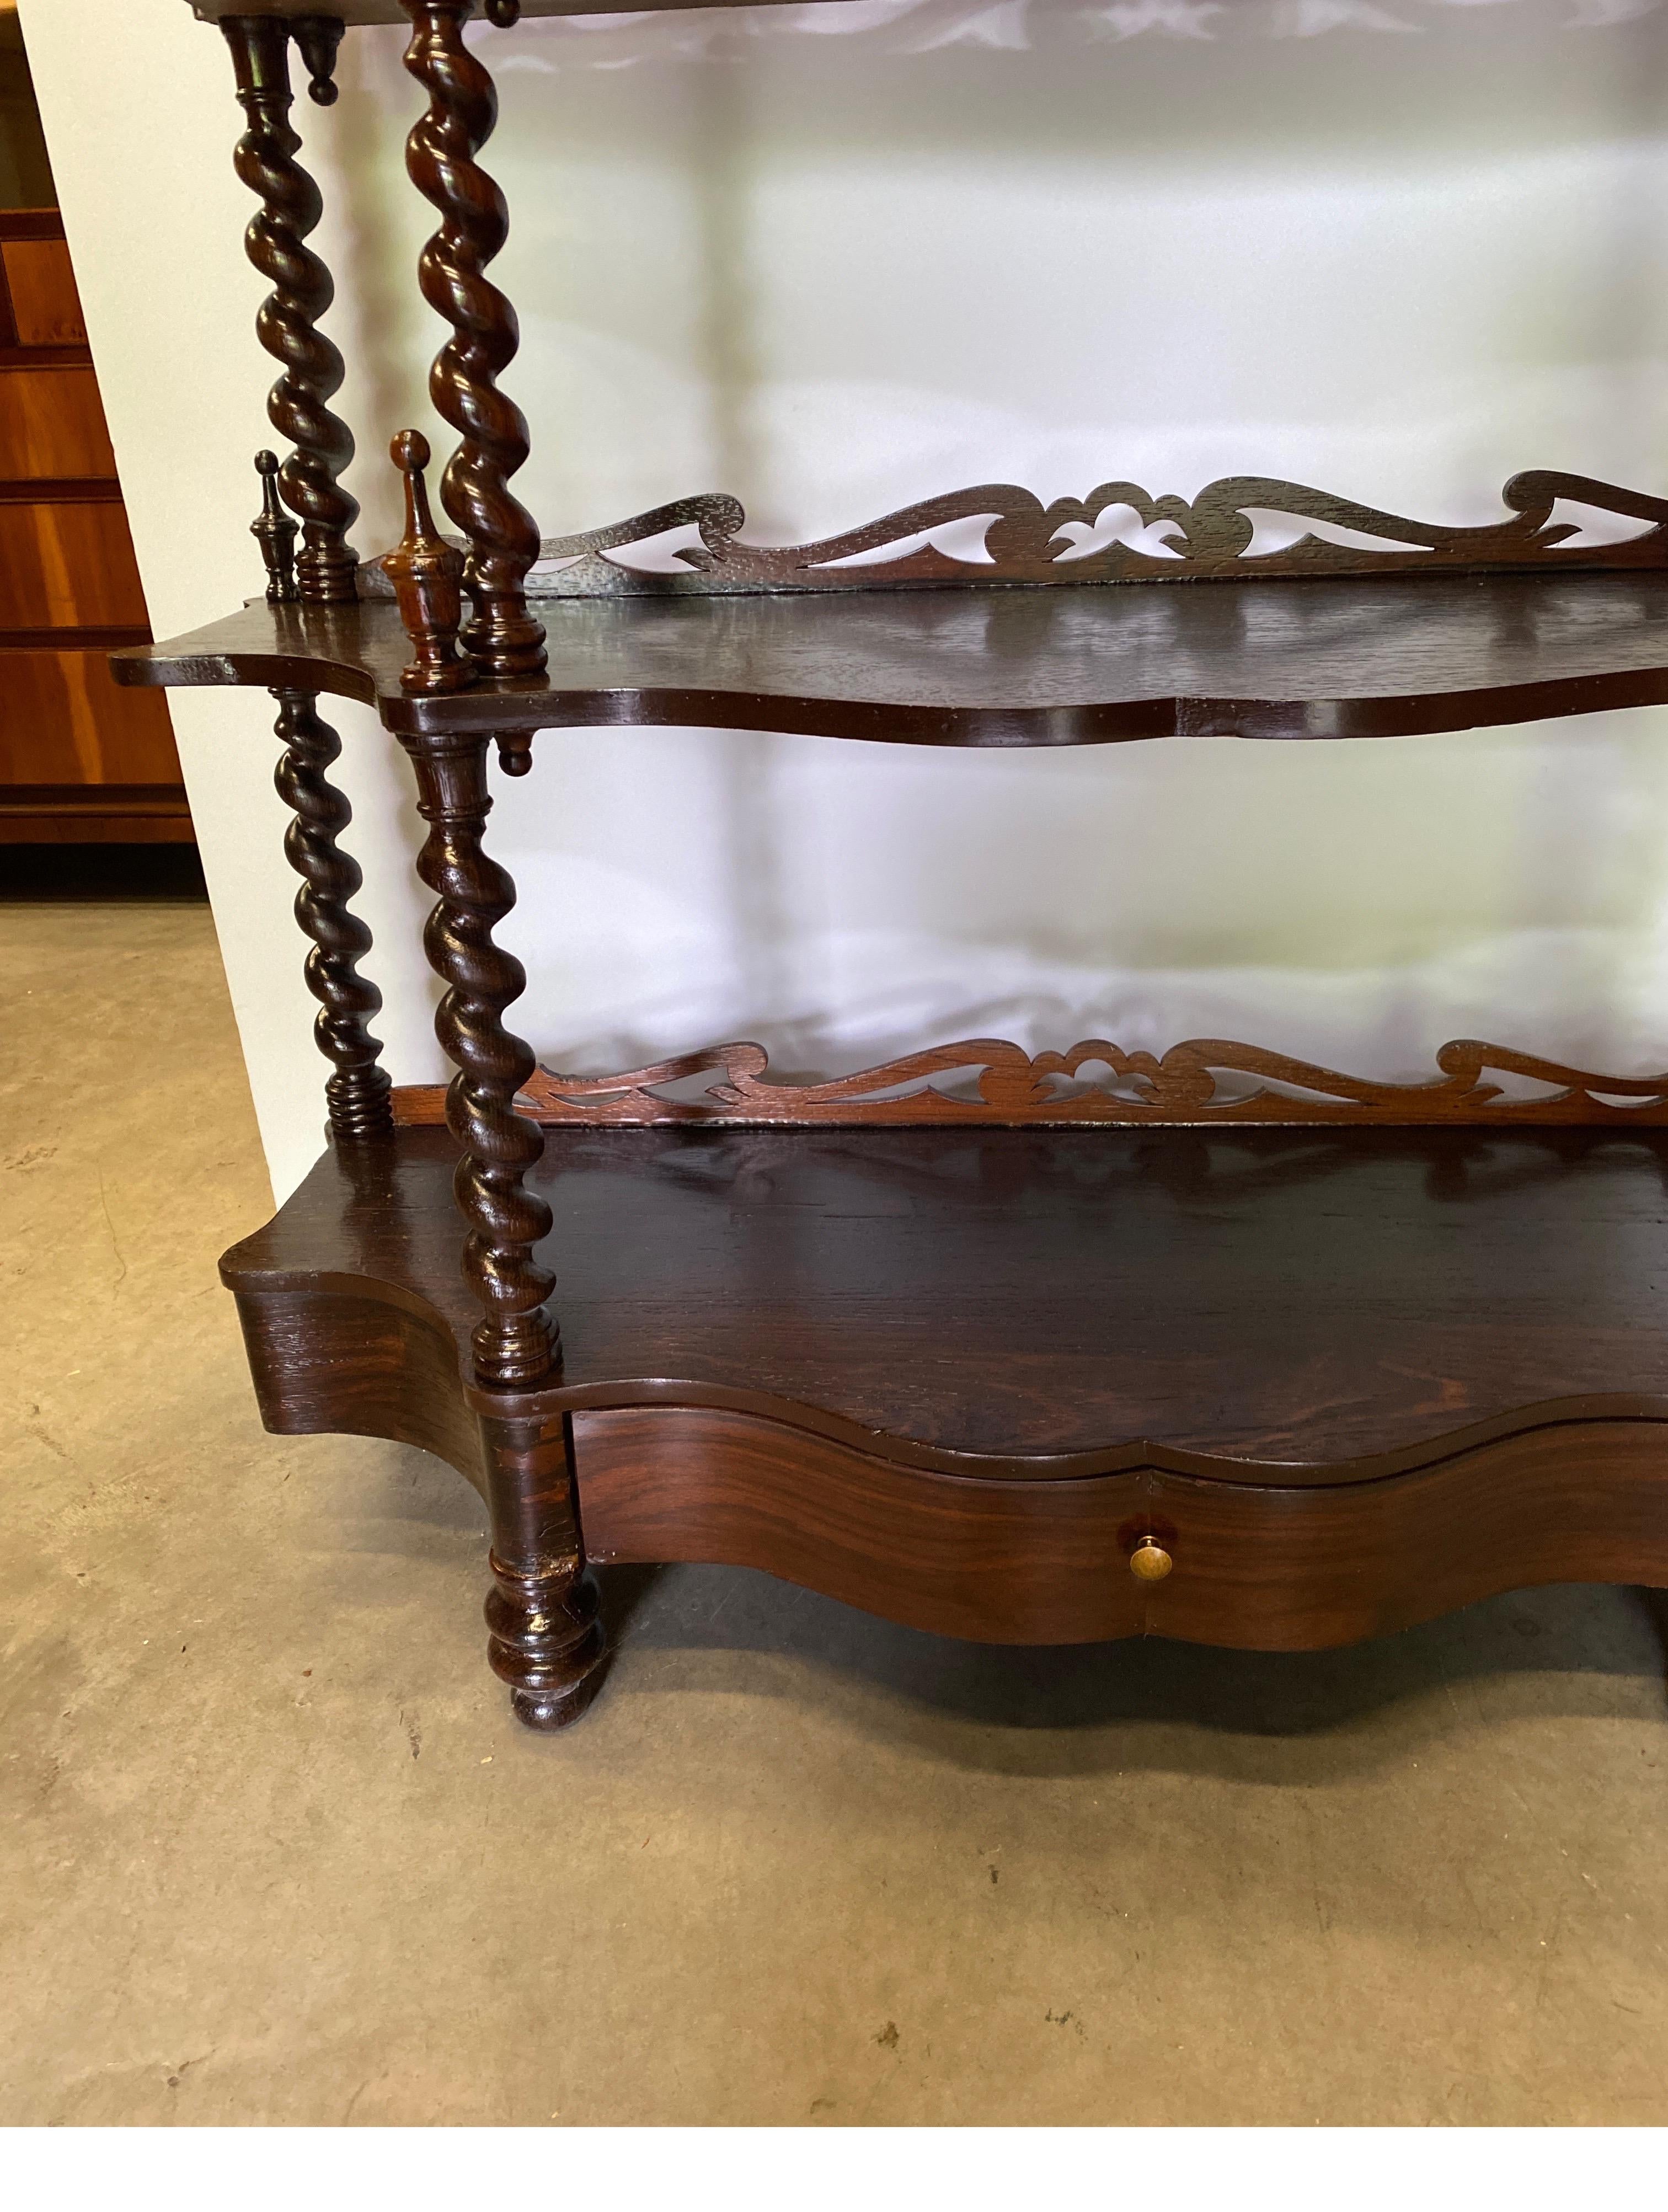 Handsome dark walnut barley twist open book case. The six shelves of variegated sizes with a functional brawer at the bottom. The supports are hand carved barley twist design with finals at the top. The brace at the back of the shelves with pierced